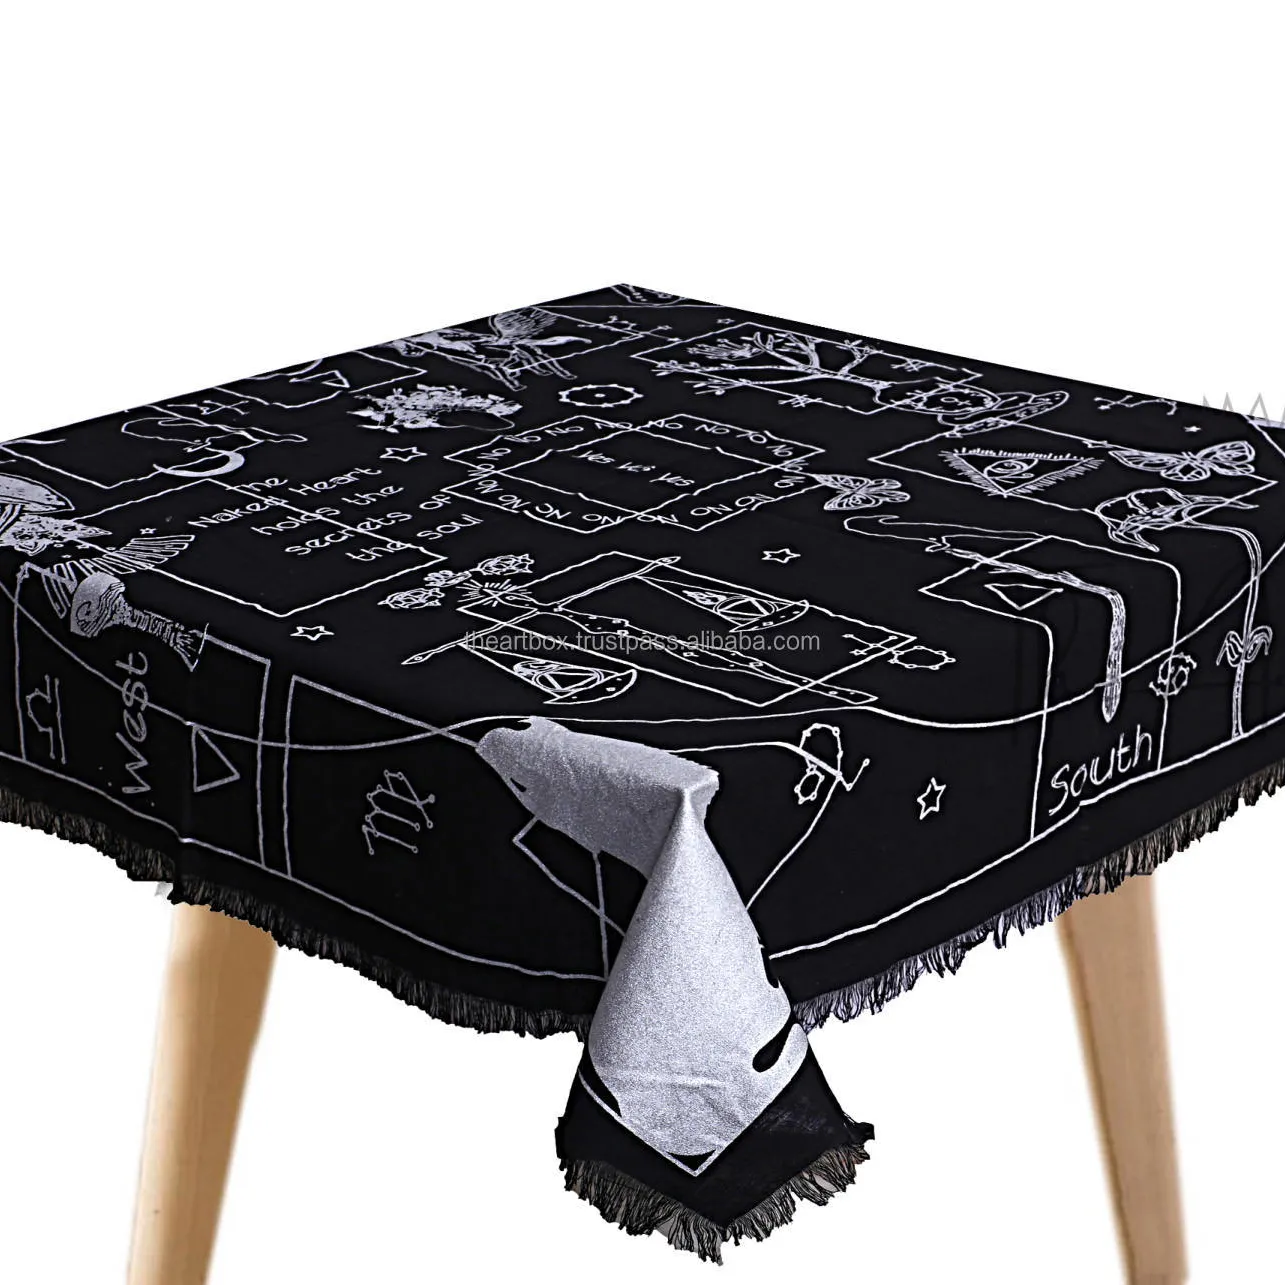 Crying Wolf Silver Square Tablecloth Spiritual Celestial Deck Cloth With Fringes Home Decor Temple Altar Cloth Wall Art